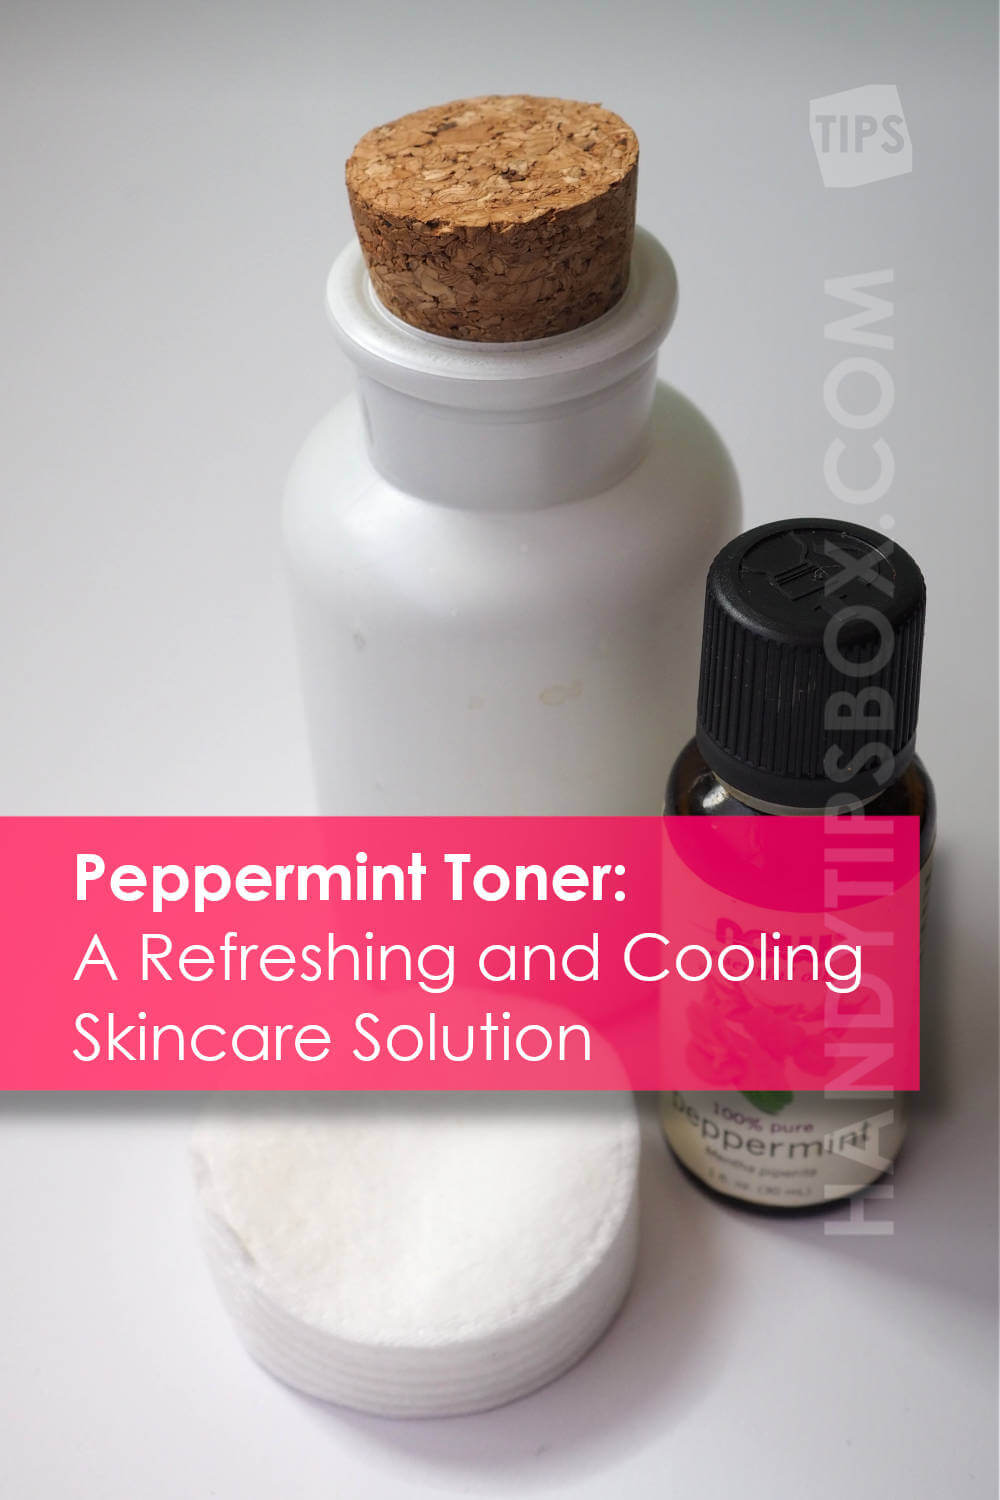 Ready-to-use Peppermint Refreshing Facial Toner